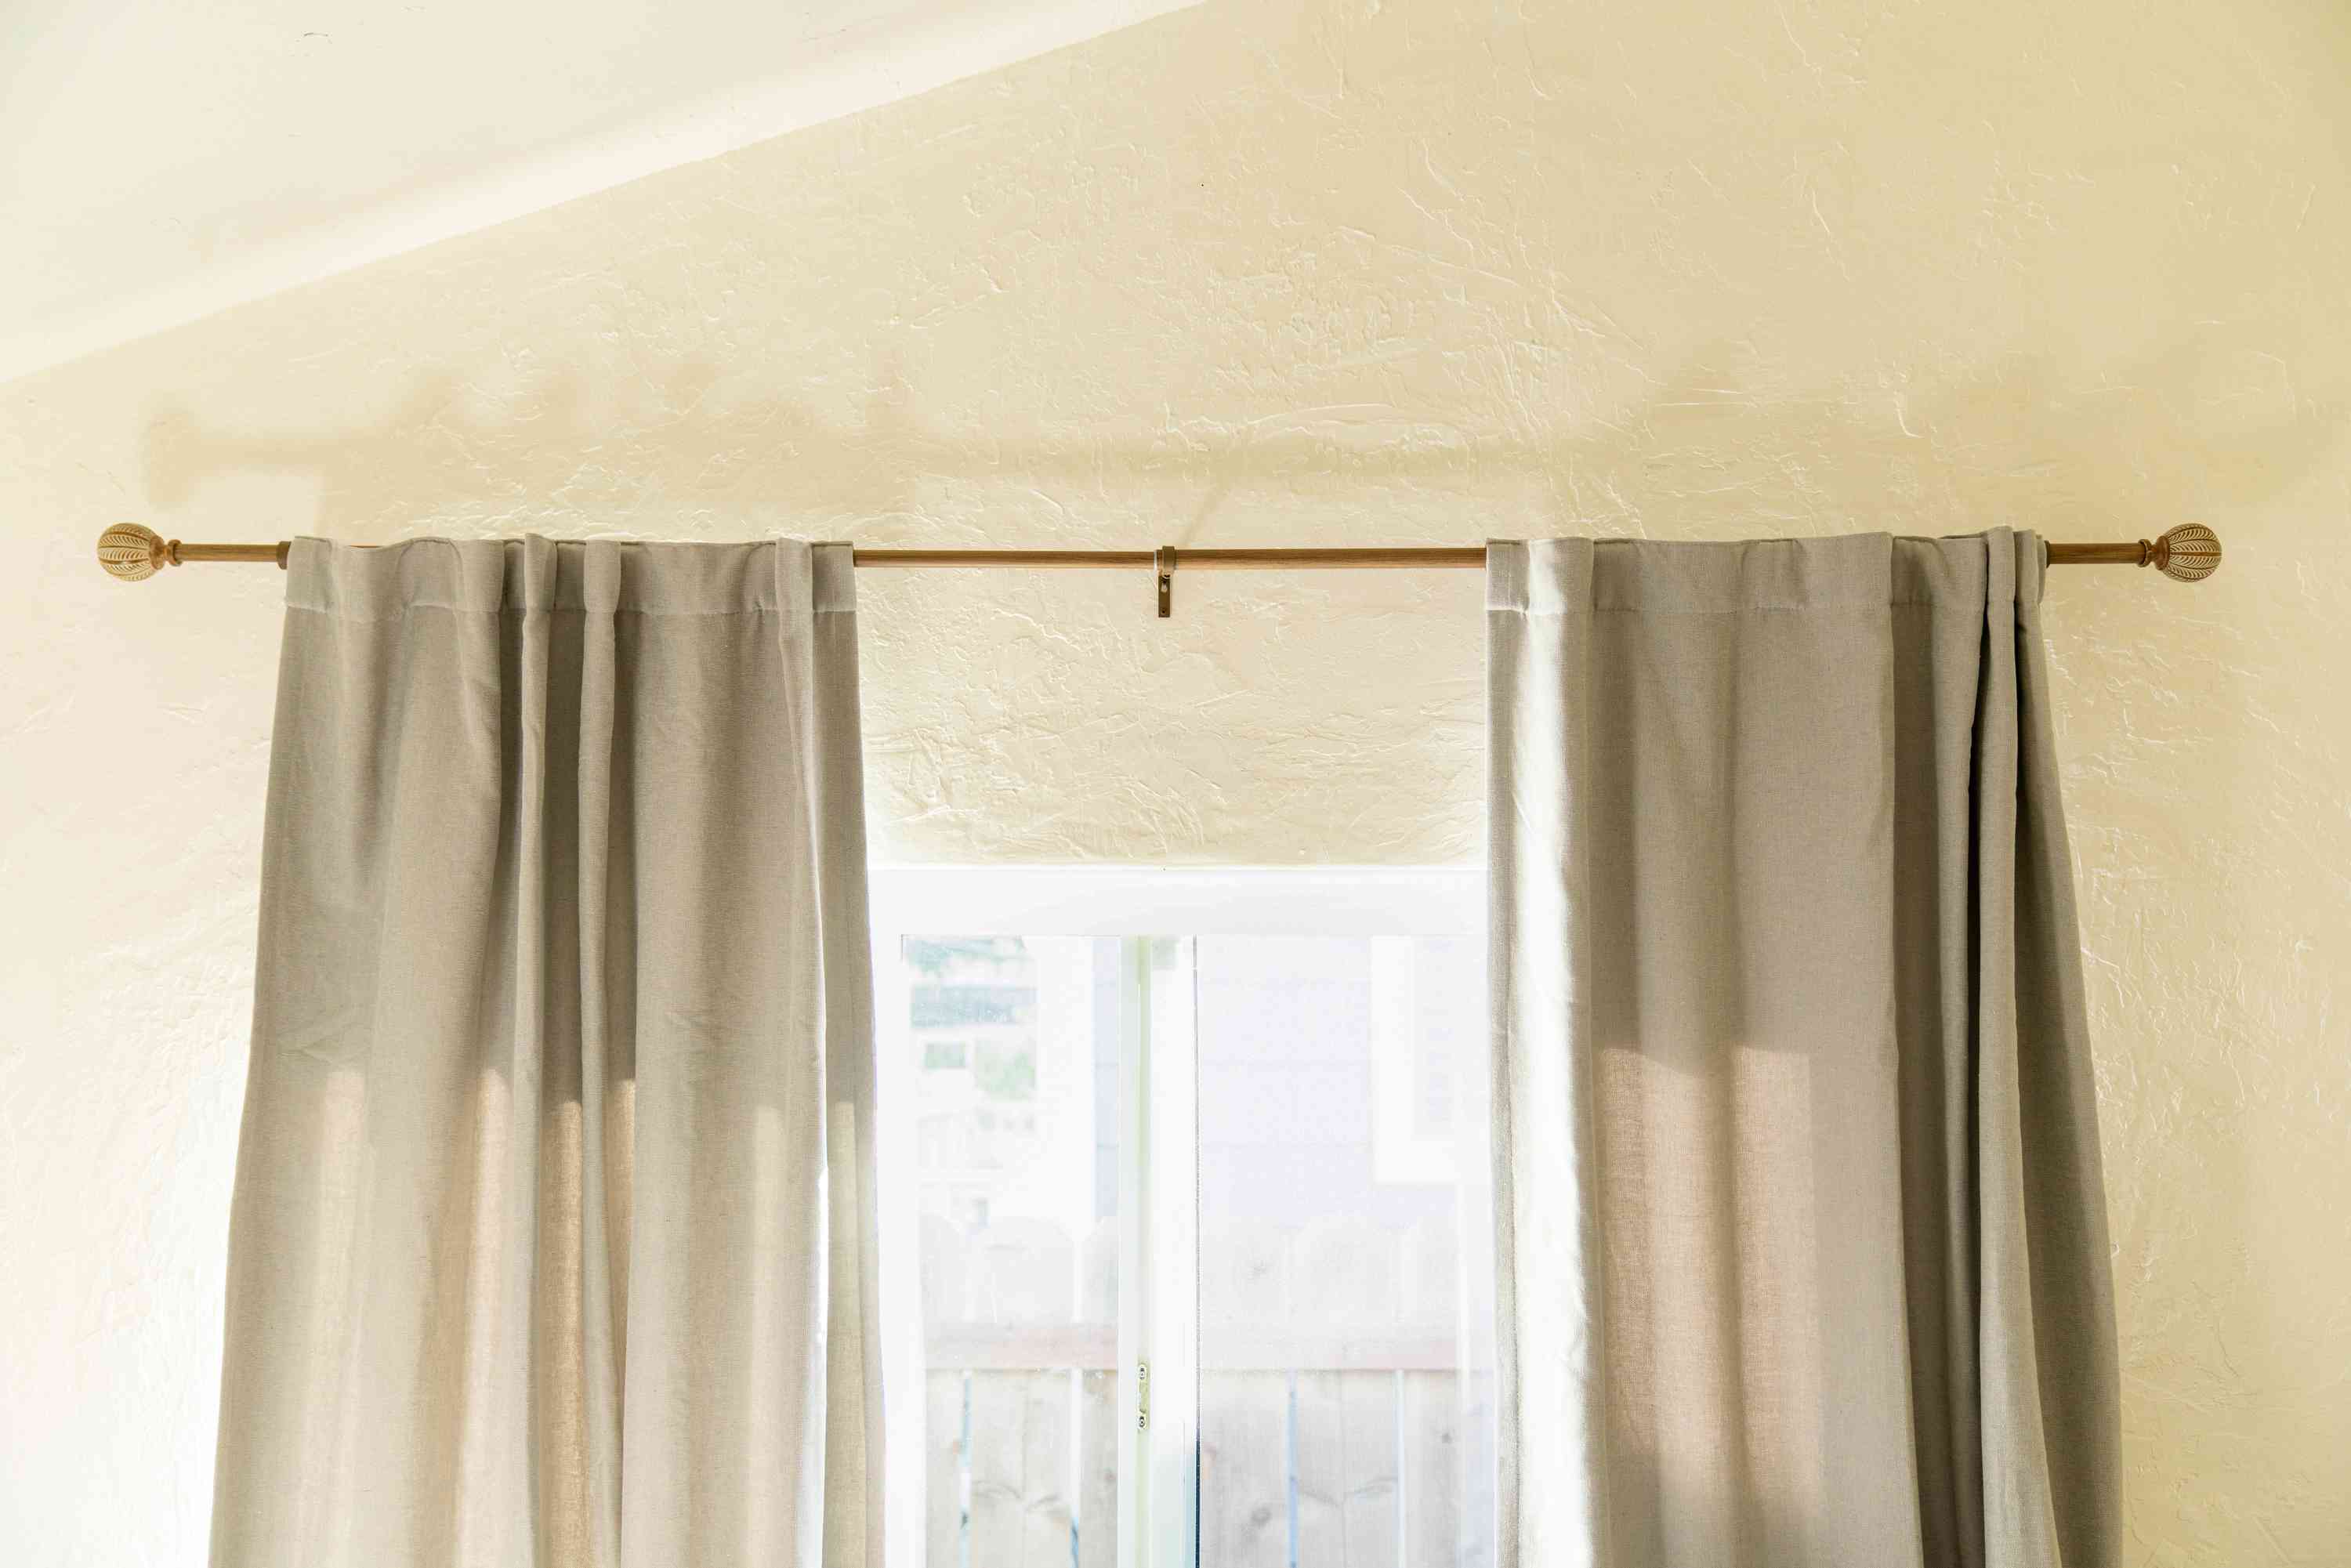 How High To Hang Curtains 10-Foot Ceiling